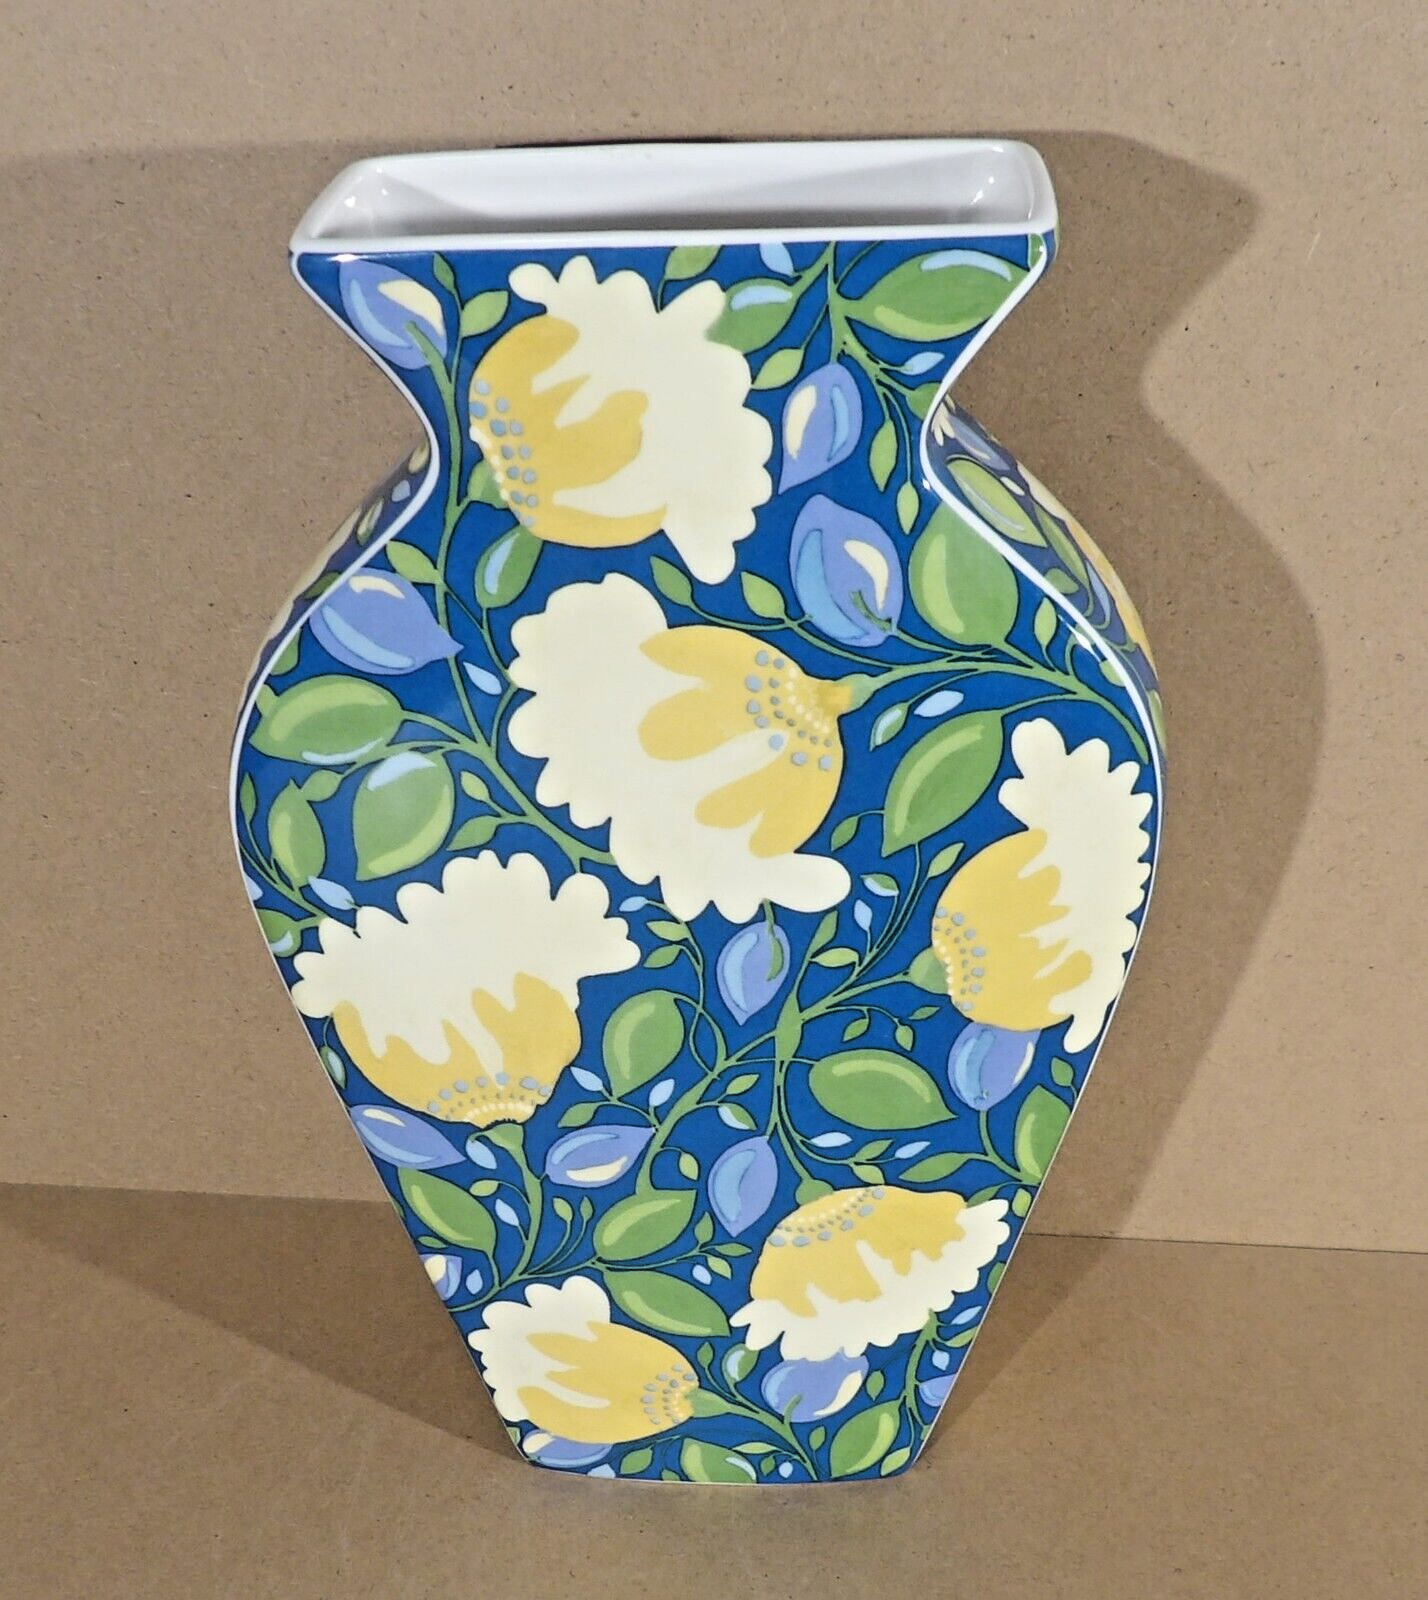 2006 Spode Kim Parker Chicory Hymn Vase Blue Yellow Green Floral 11.75\